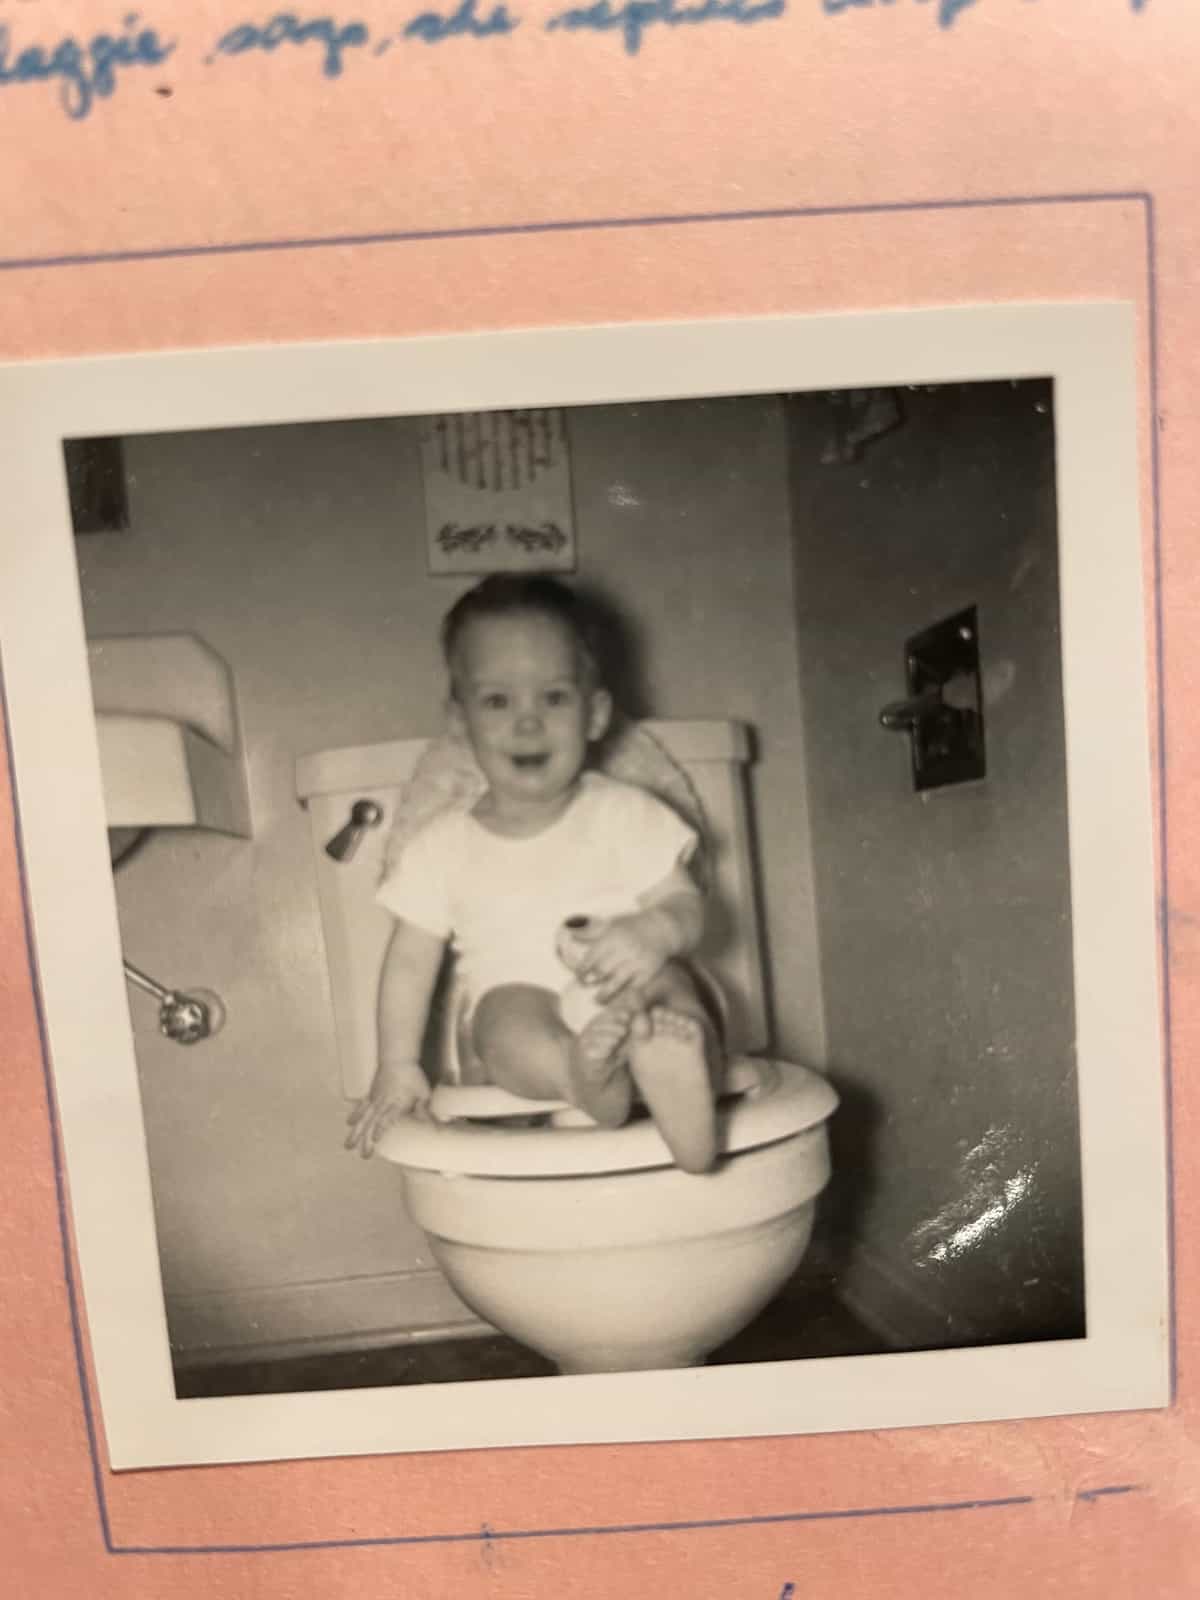 a picture of a baby sitting on a toilet.